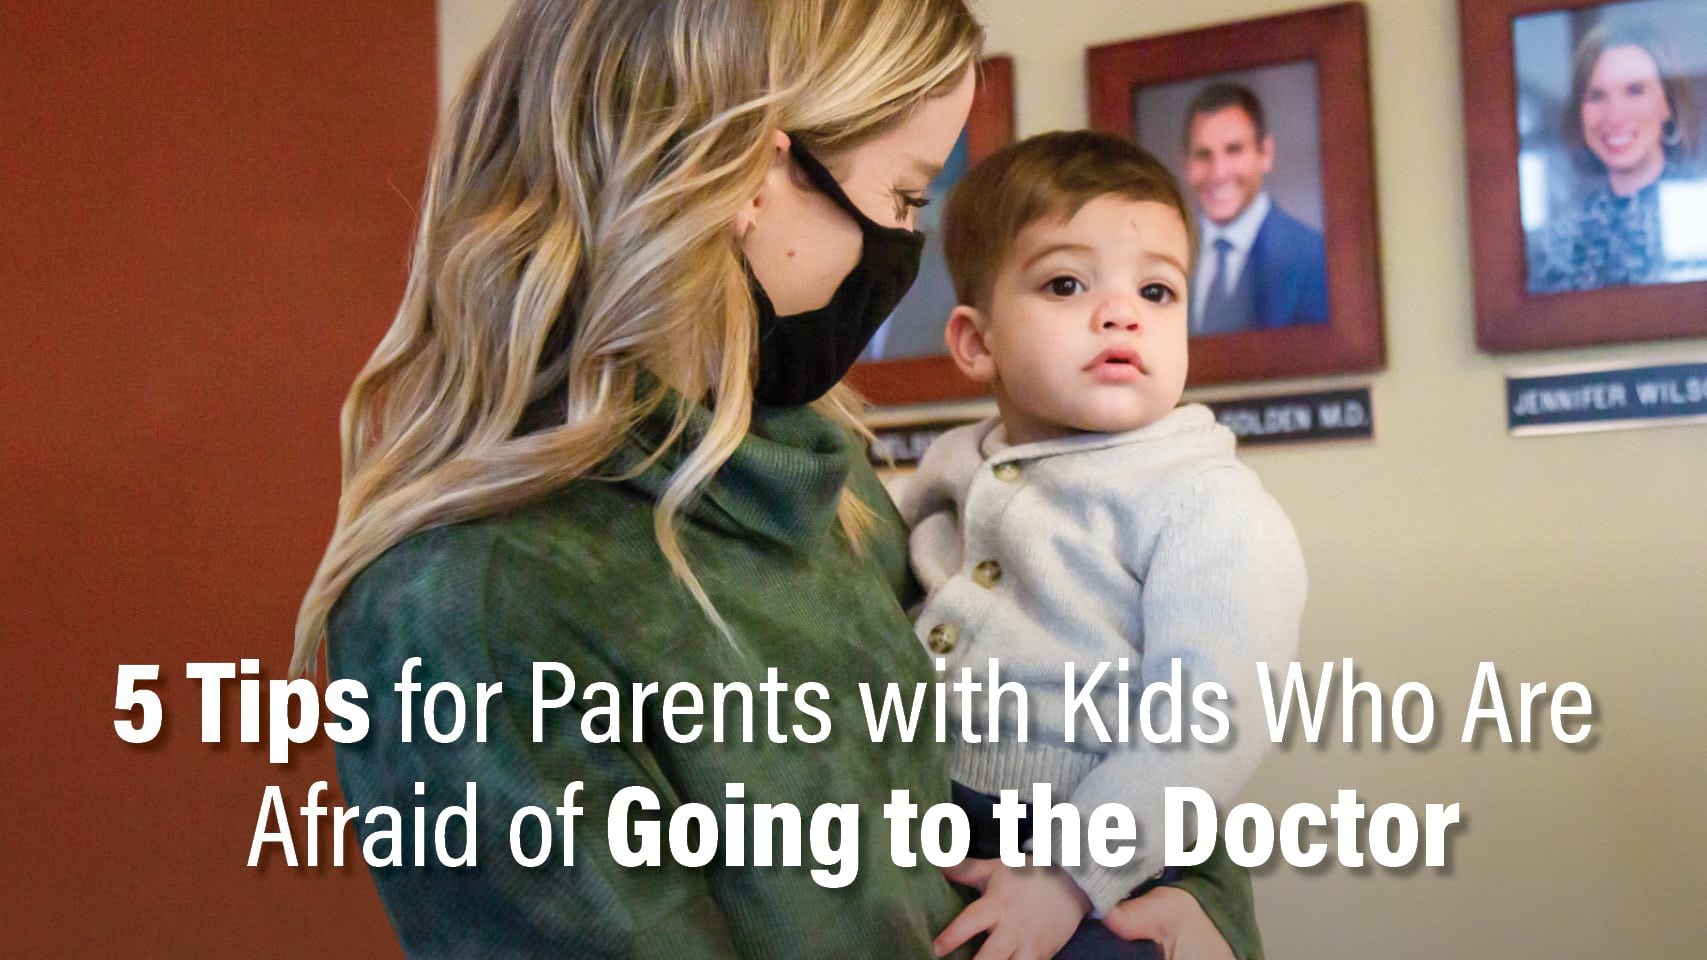 A woman holds her son during a doctor's appointment at Richfield Medical Group with text " 5 Tips for Parents with Kids Who Are Afraid of Going to the Doctor" for a blog by Richfield Medical Group